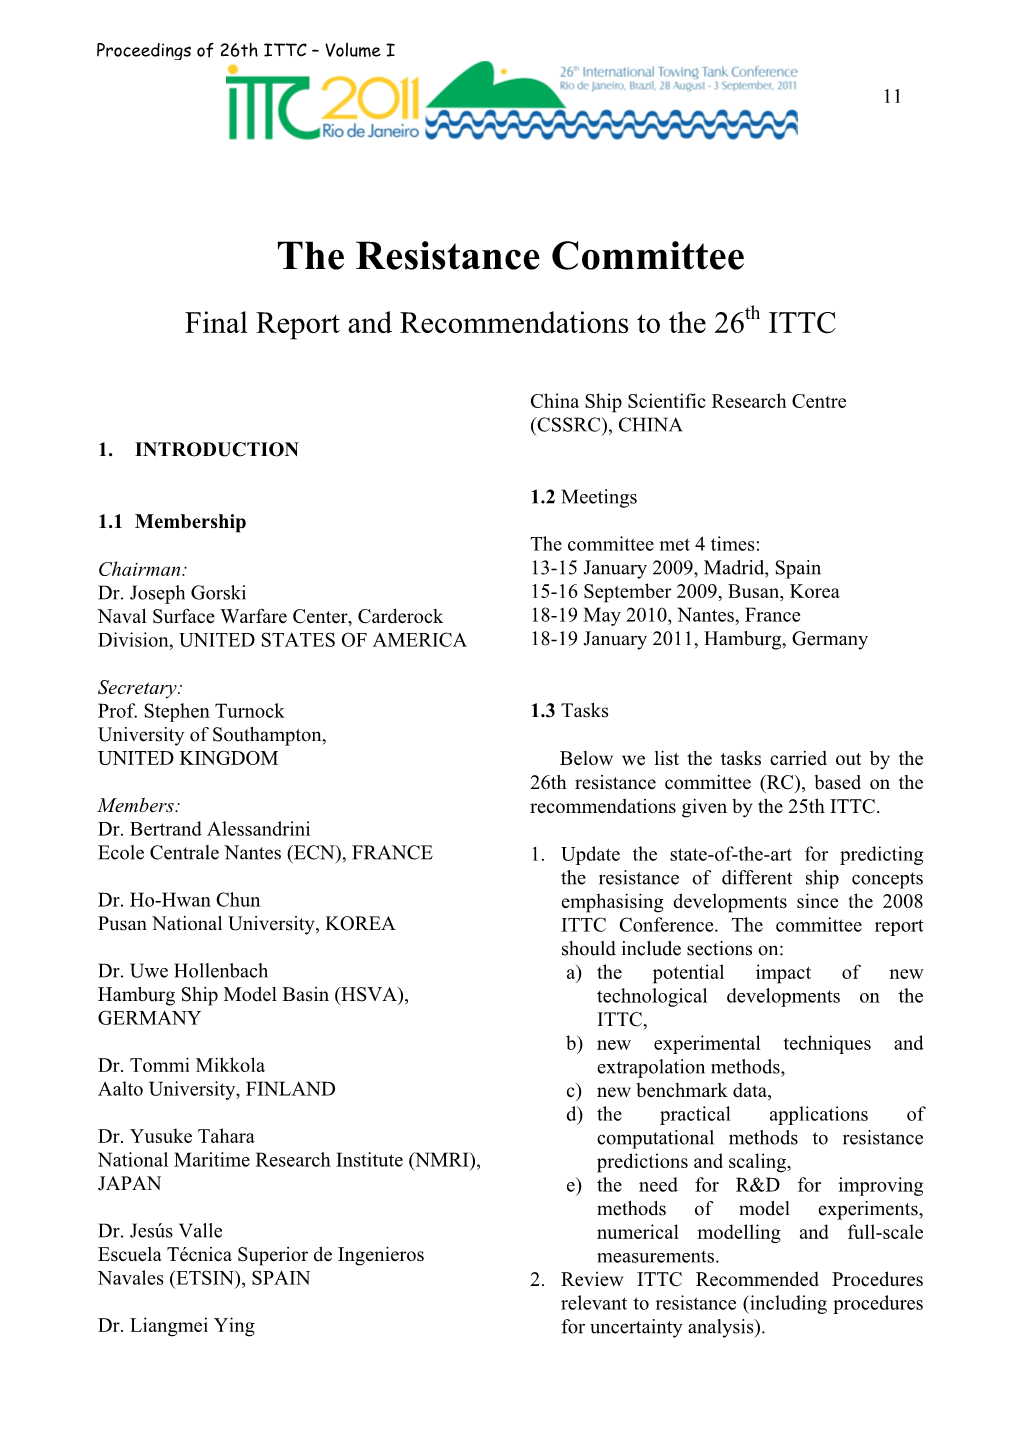 The Resistance Committee Final Report and Recommendations to the 26Th ITTC